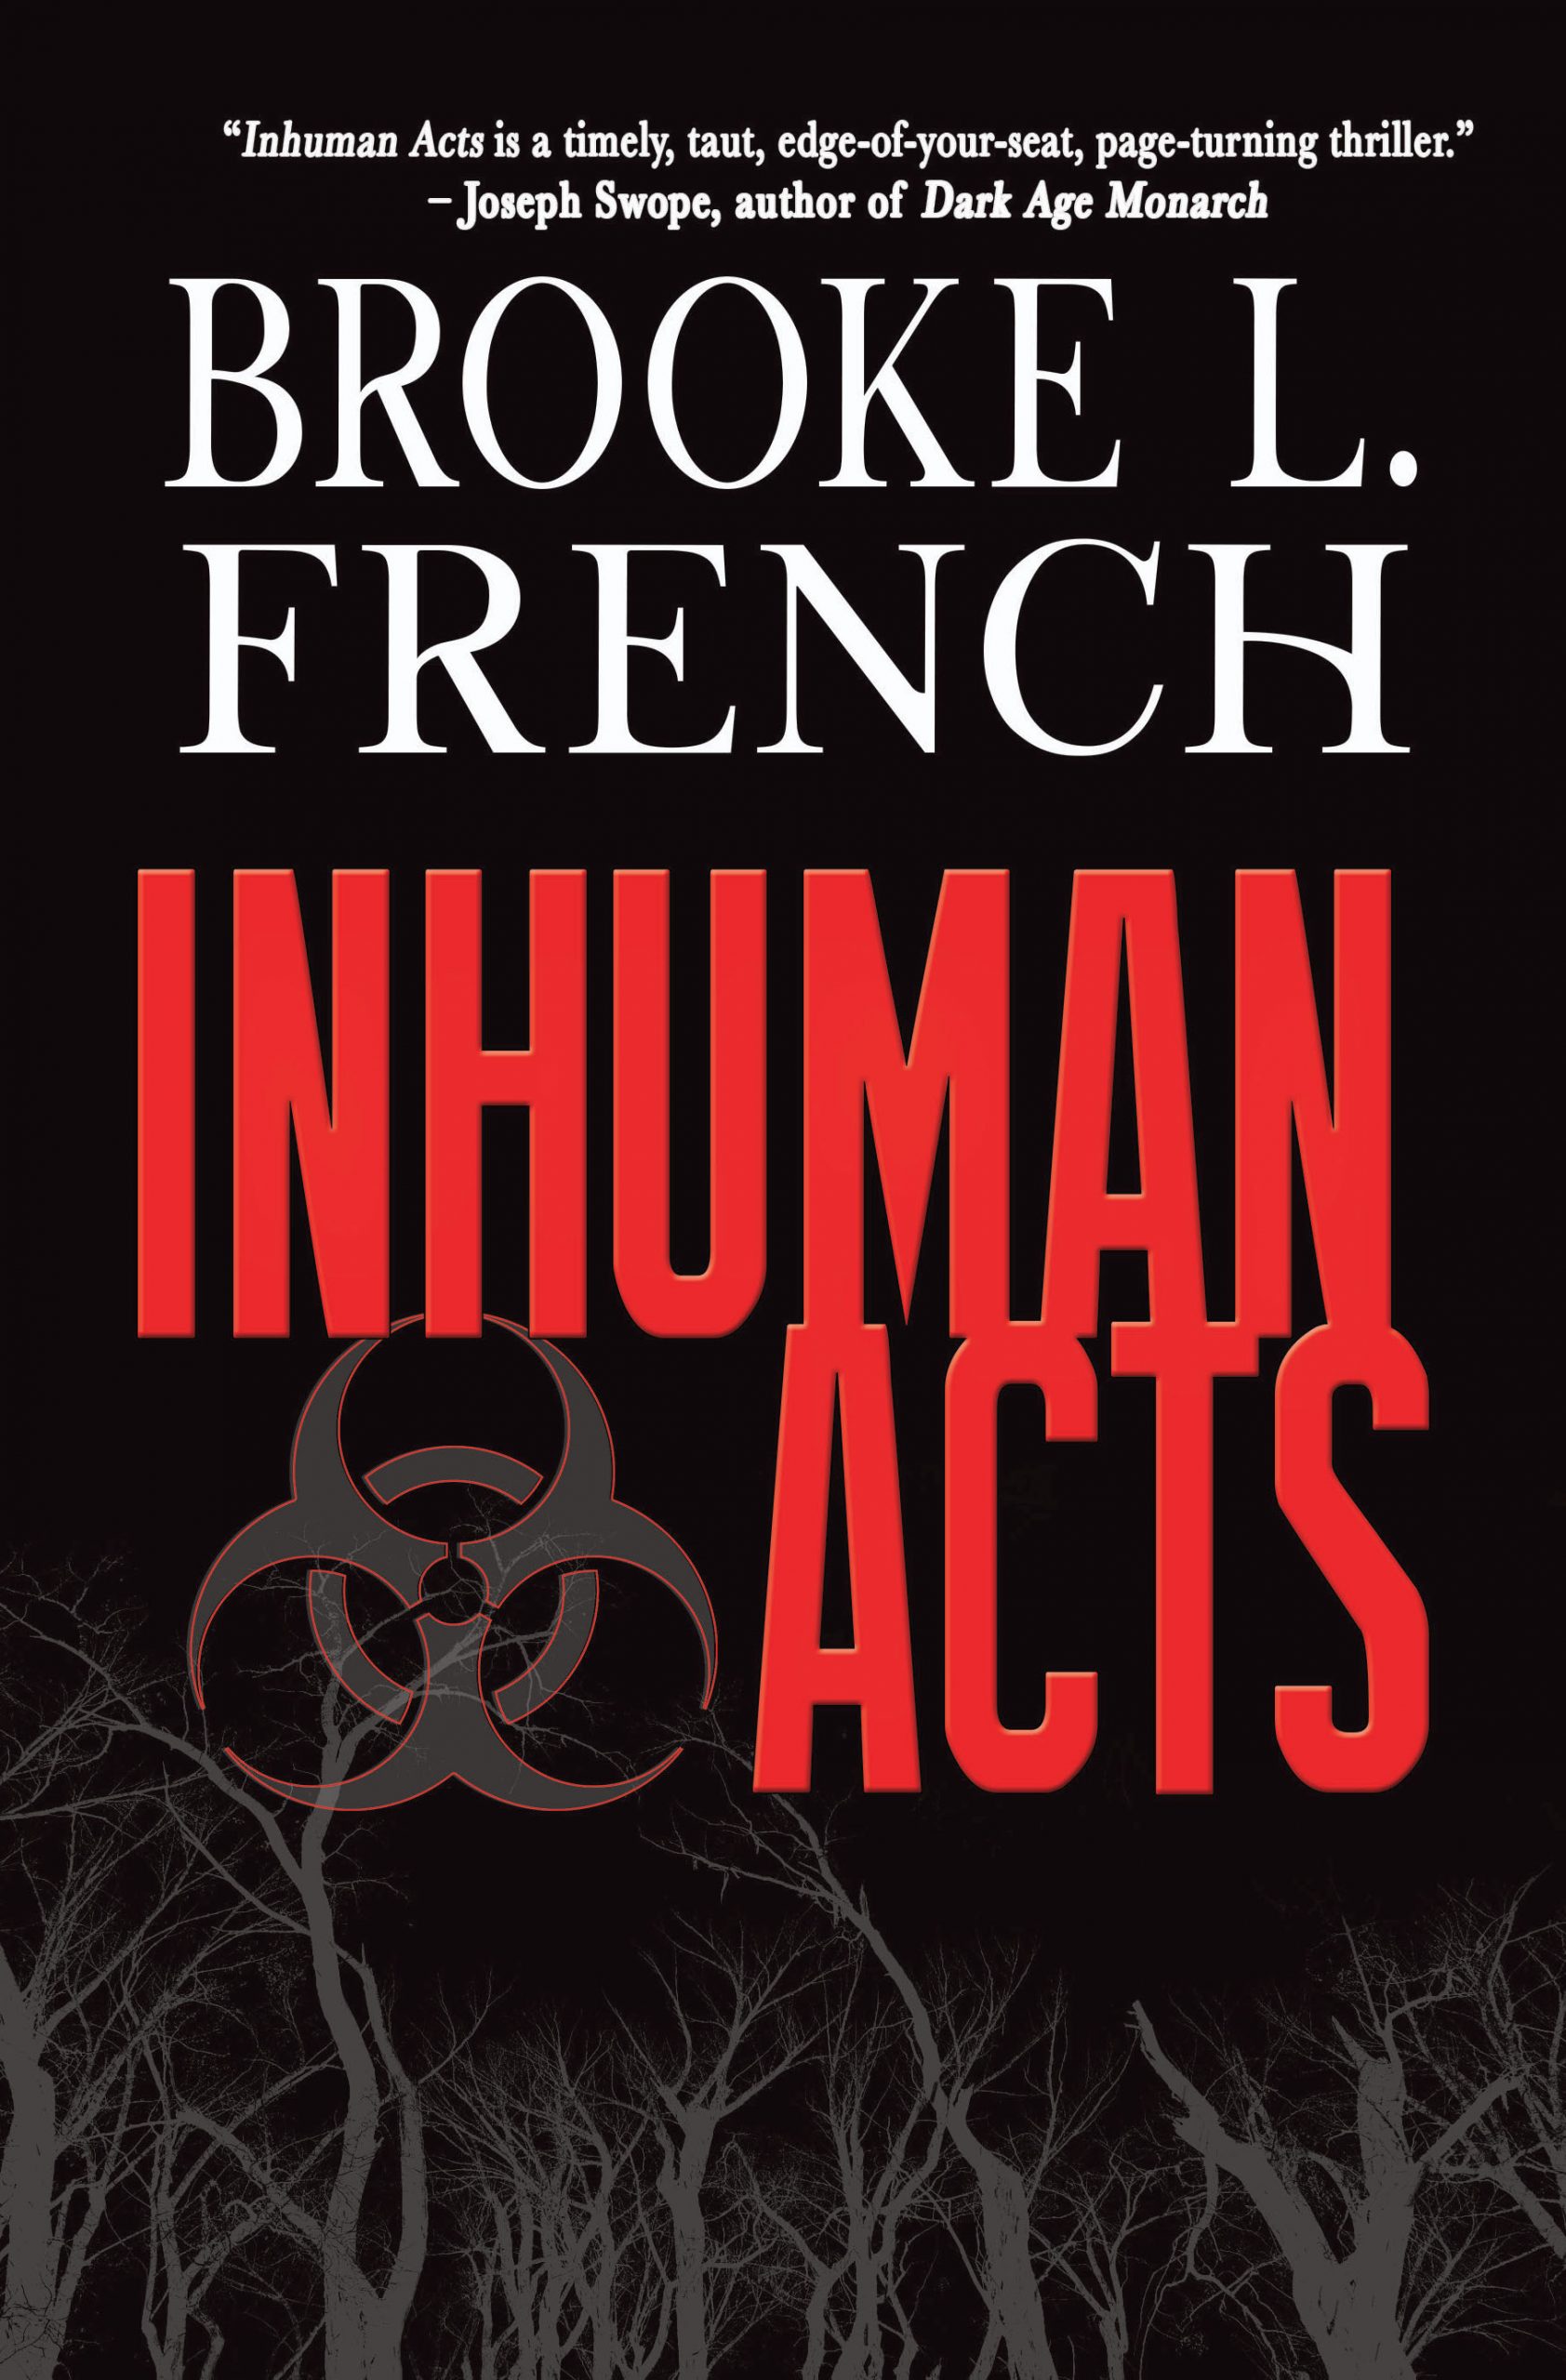 Inhuman Acts by Brooke L French